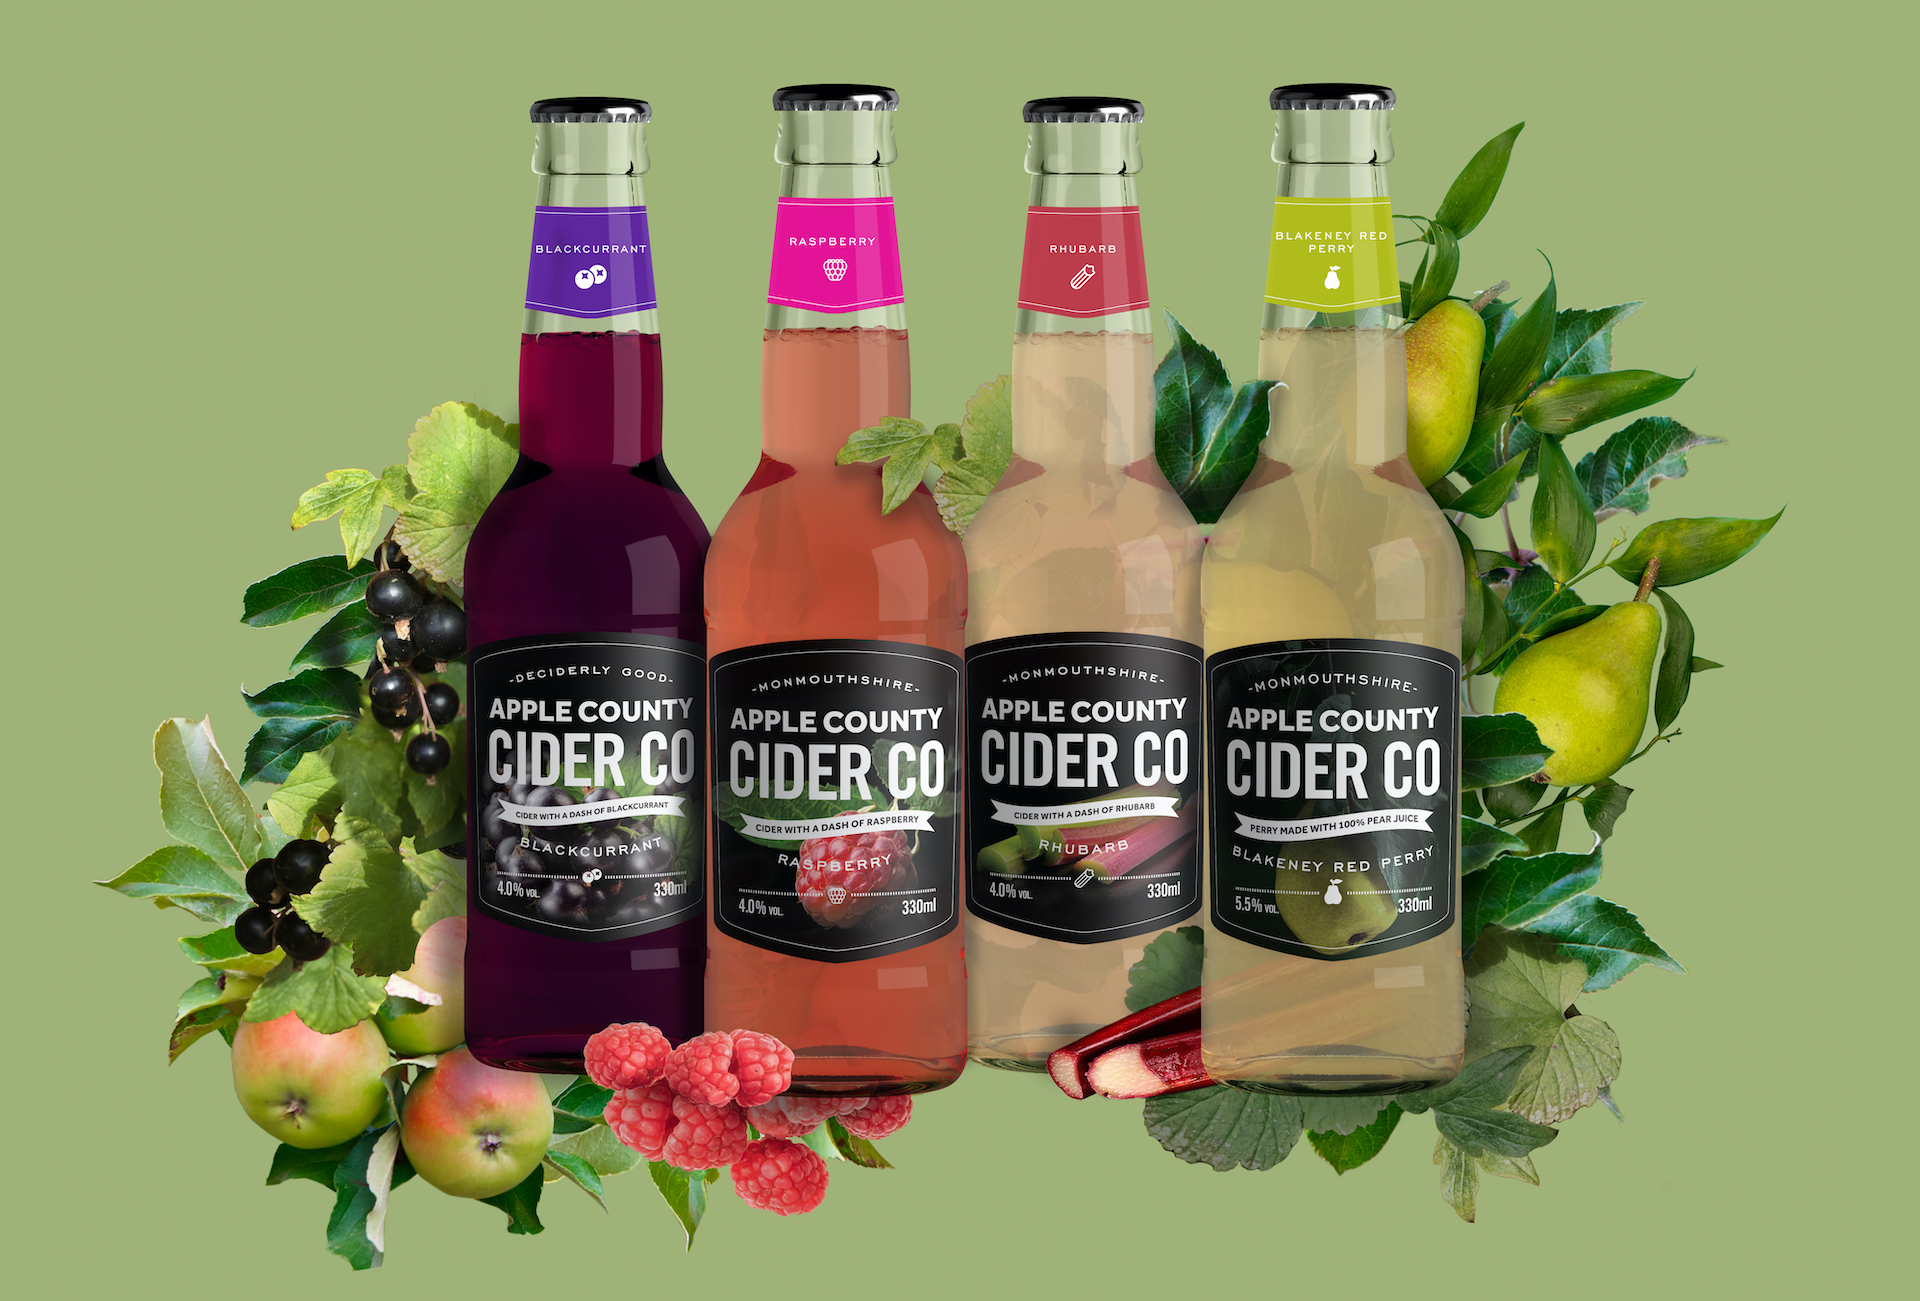 The range of Apple County Cider Company fruit ciders in bottles